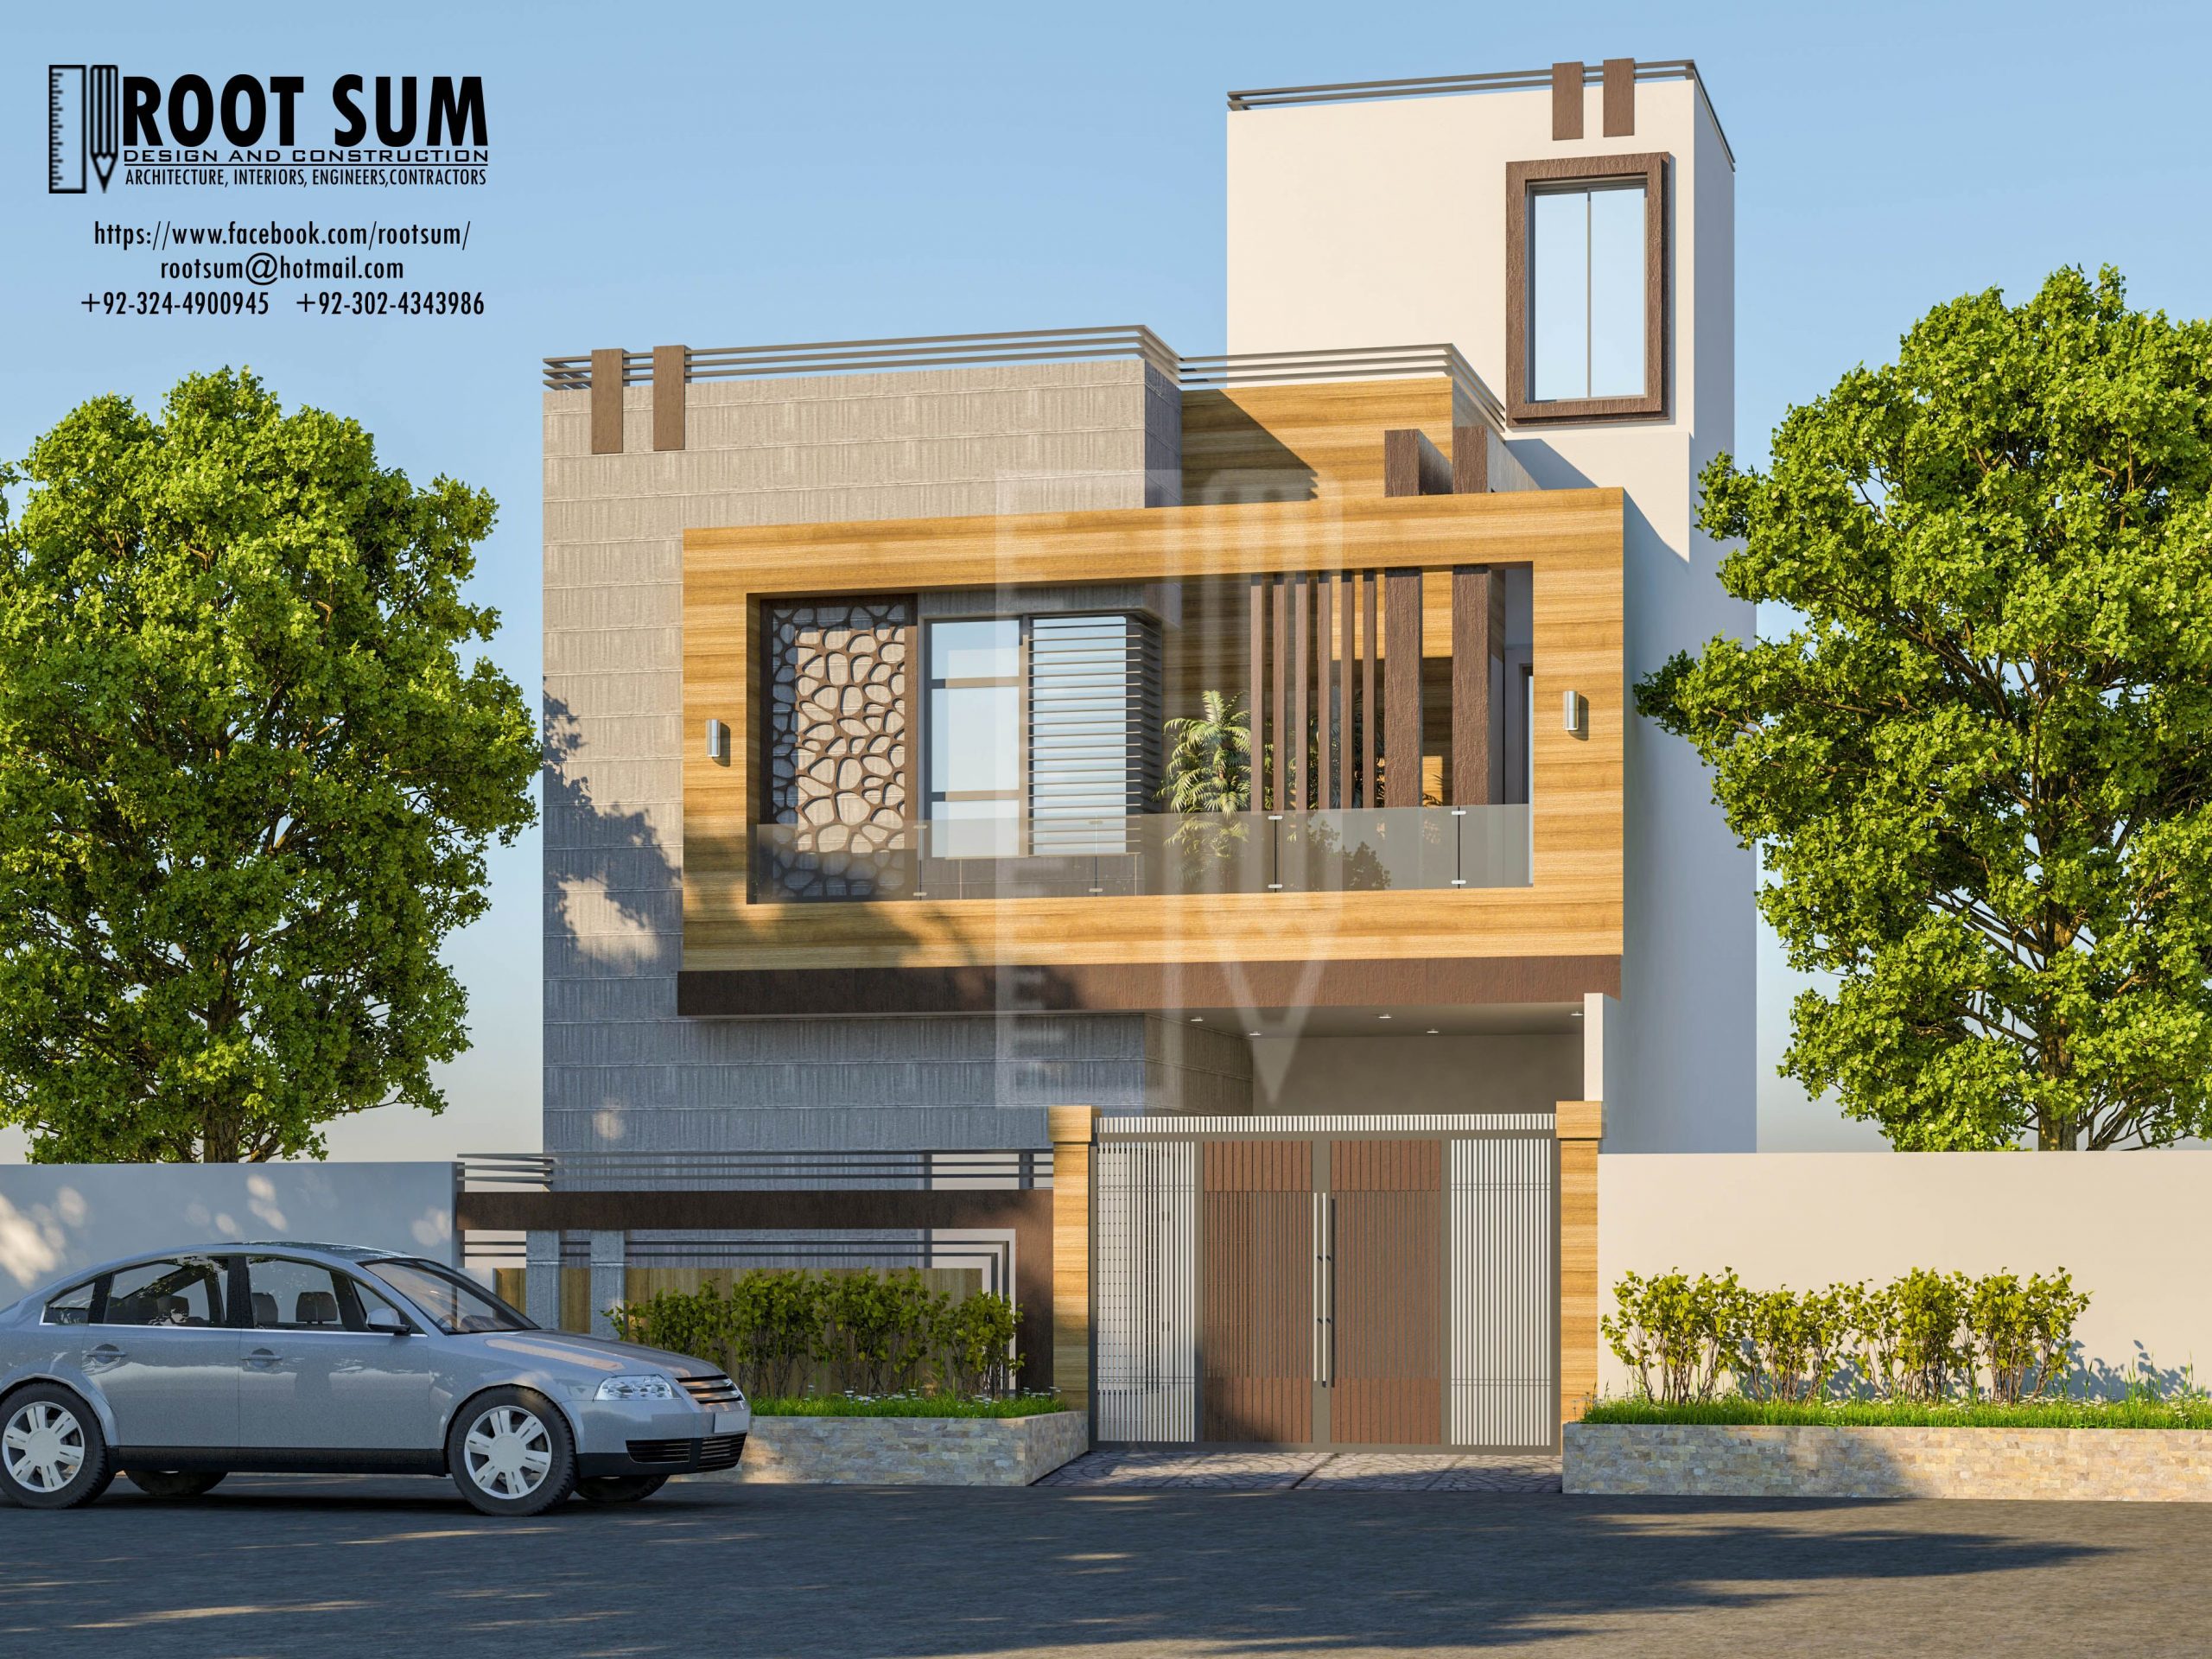 5 Marla Residential House-Al Raheem Garden Lahore By Root Sum Design and Construction-Prespective-2, Day Light